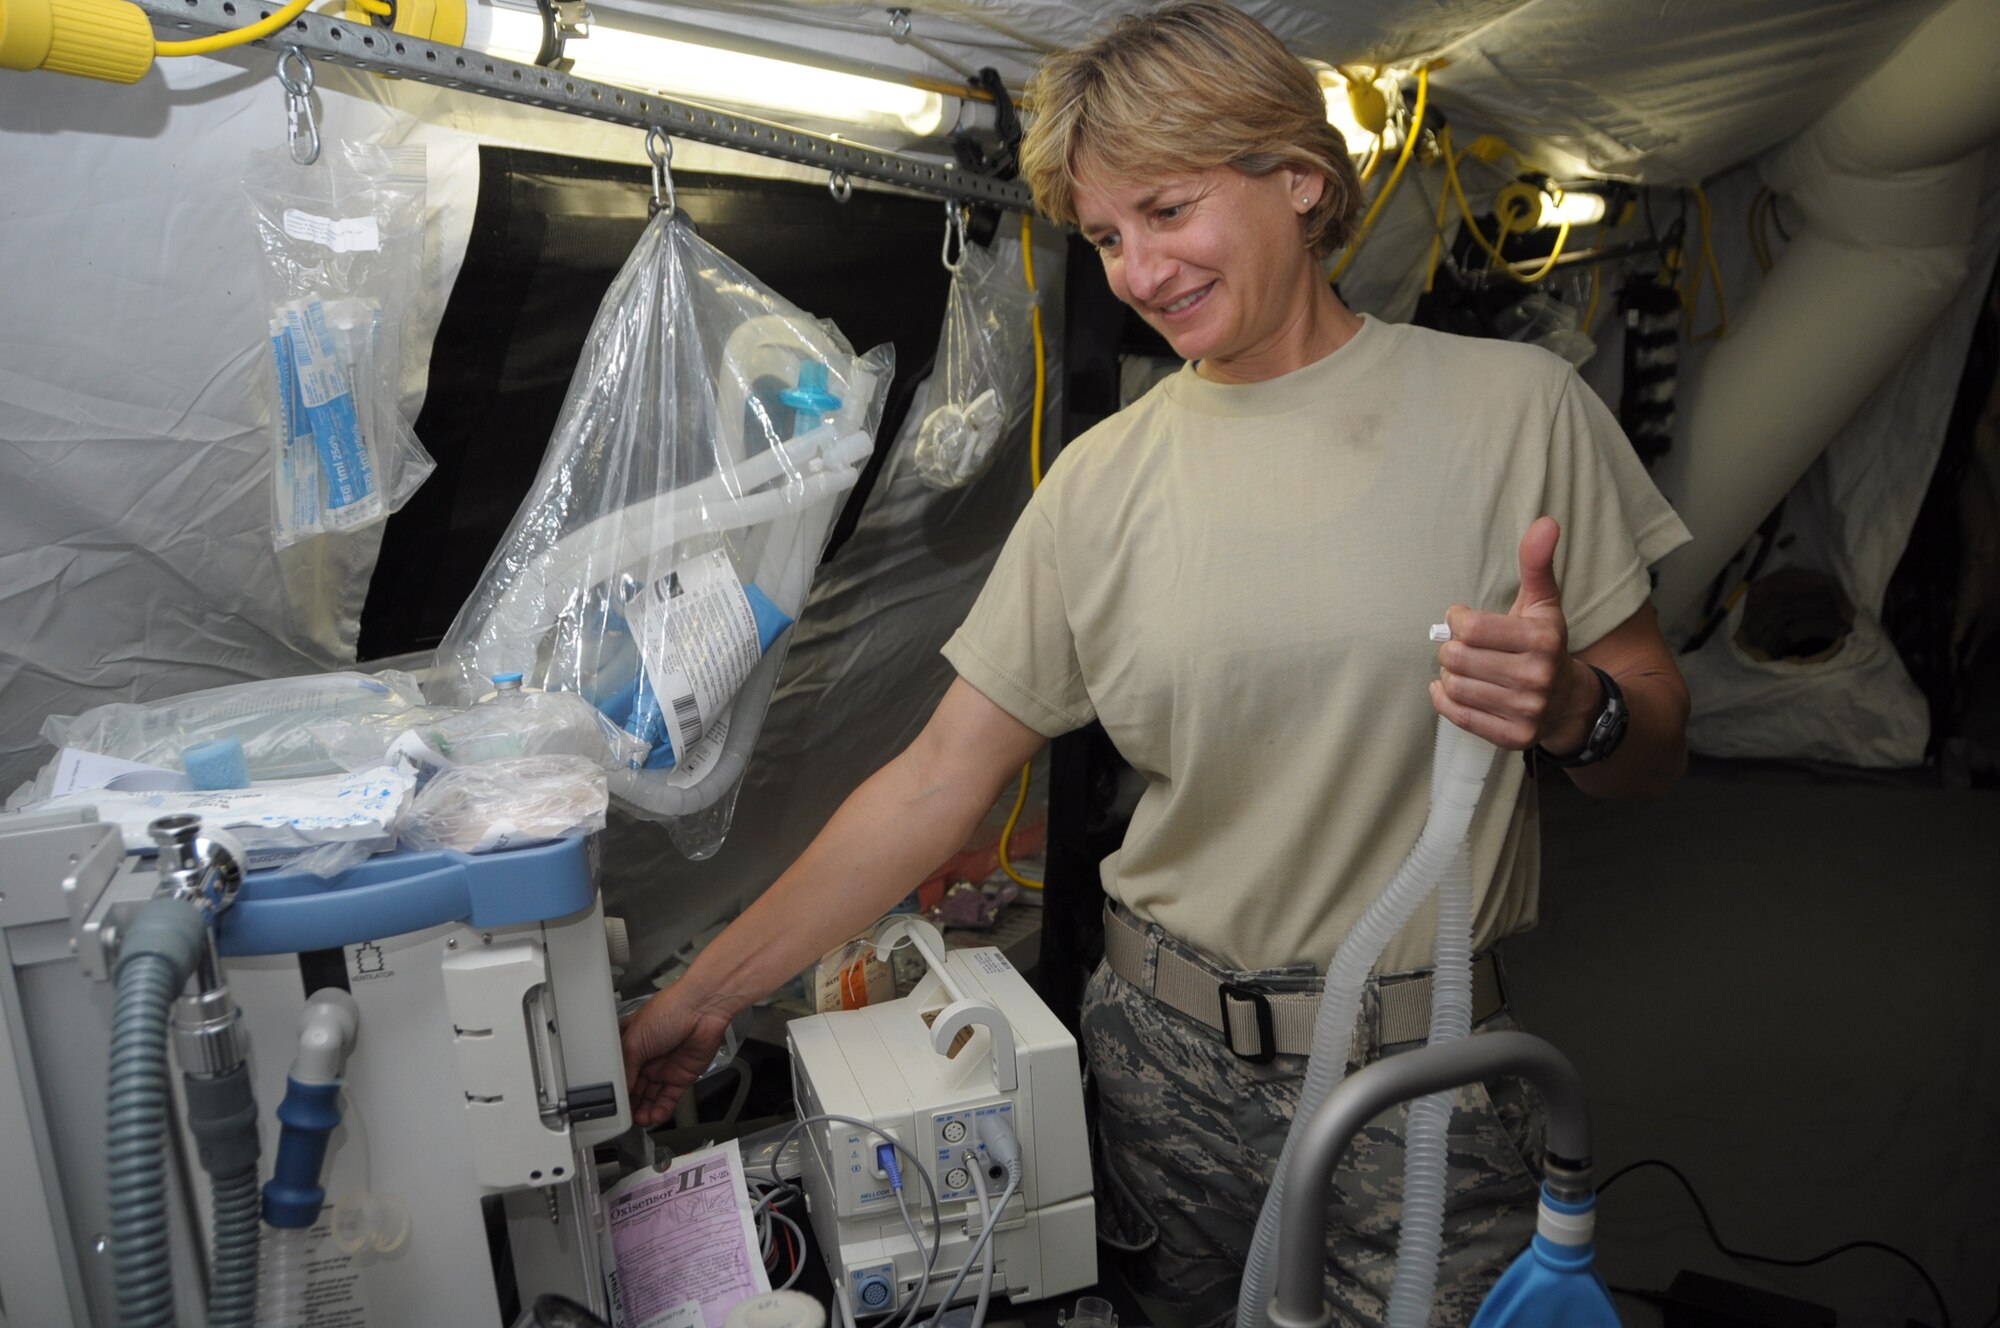 U.S. Air Force Major Bernadette Wisor, 60th Medical Group Anesthesiologist tests her equipment inside the temporary hospital facility in Cumuto Barracks at Trinidad and Tobago April 8, 2011. Wisor is a part of the Expeditionary Medical Support Health Response Team in support of the Allied Forces Humanitarian Exercise/Fuerzas Aliadas or FA HUM 2011. (U.S. Air Force photo by 2d Lt Joel Banjo-Johnson/Released)